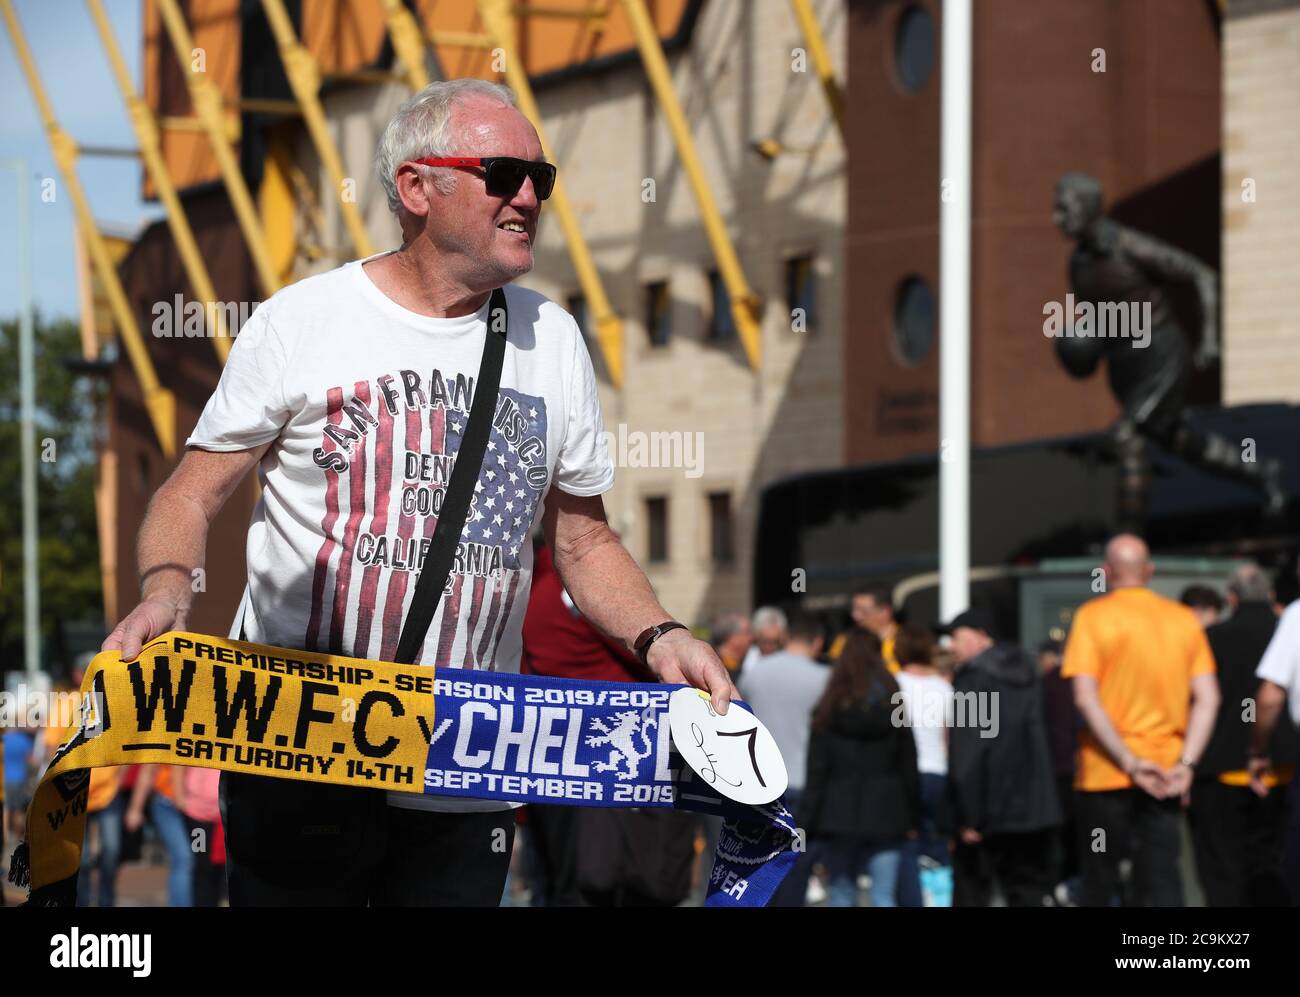 Street seller of Wolves and Chelsea half and half scarfs outside Molineux and near Billy Wright statue on Waterloo Street prior to the Premier League match at Molineux, Wolverhampton. Stock Photo